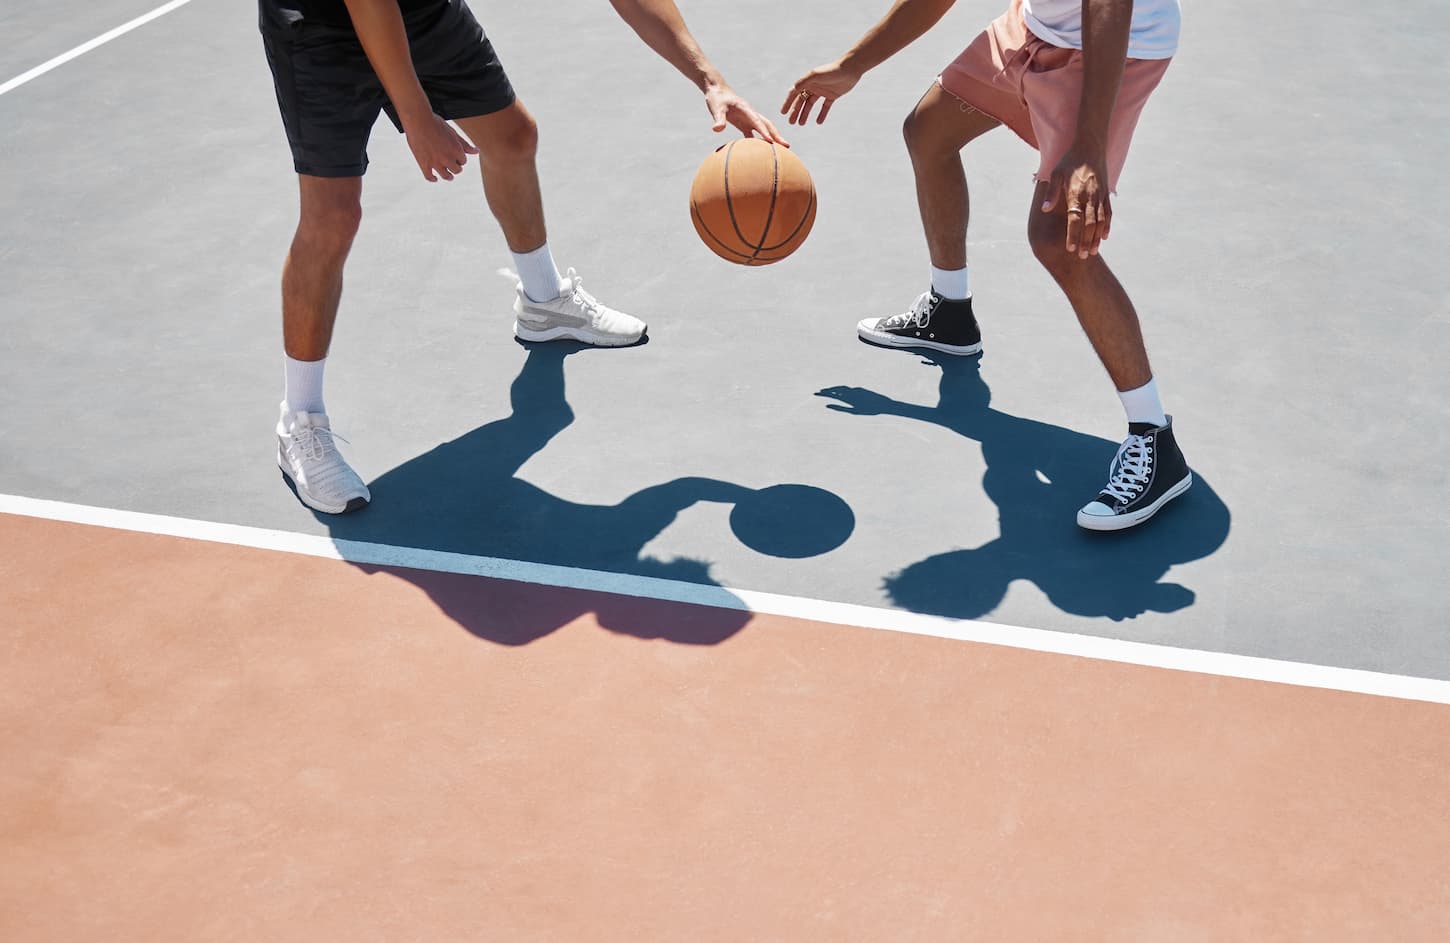 An image of two basketball players practicing and training basketball on an outside court.